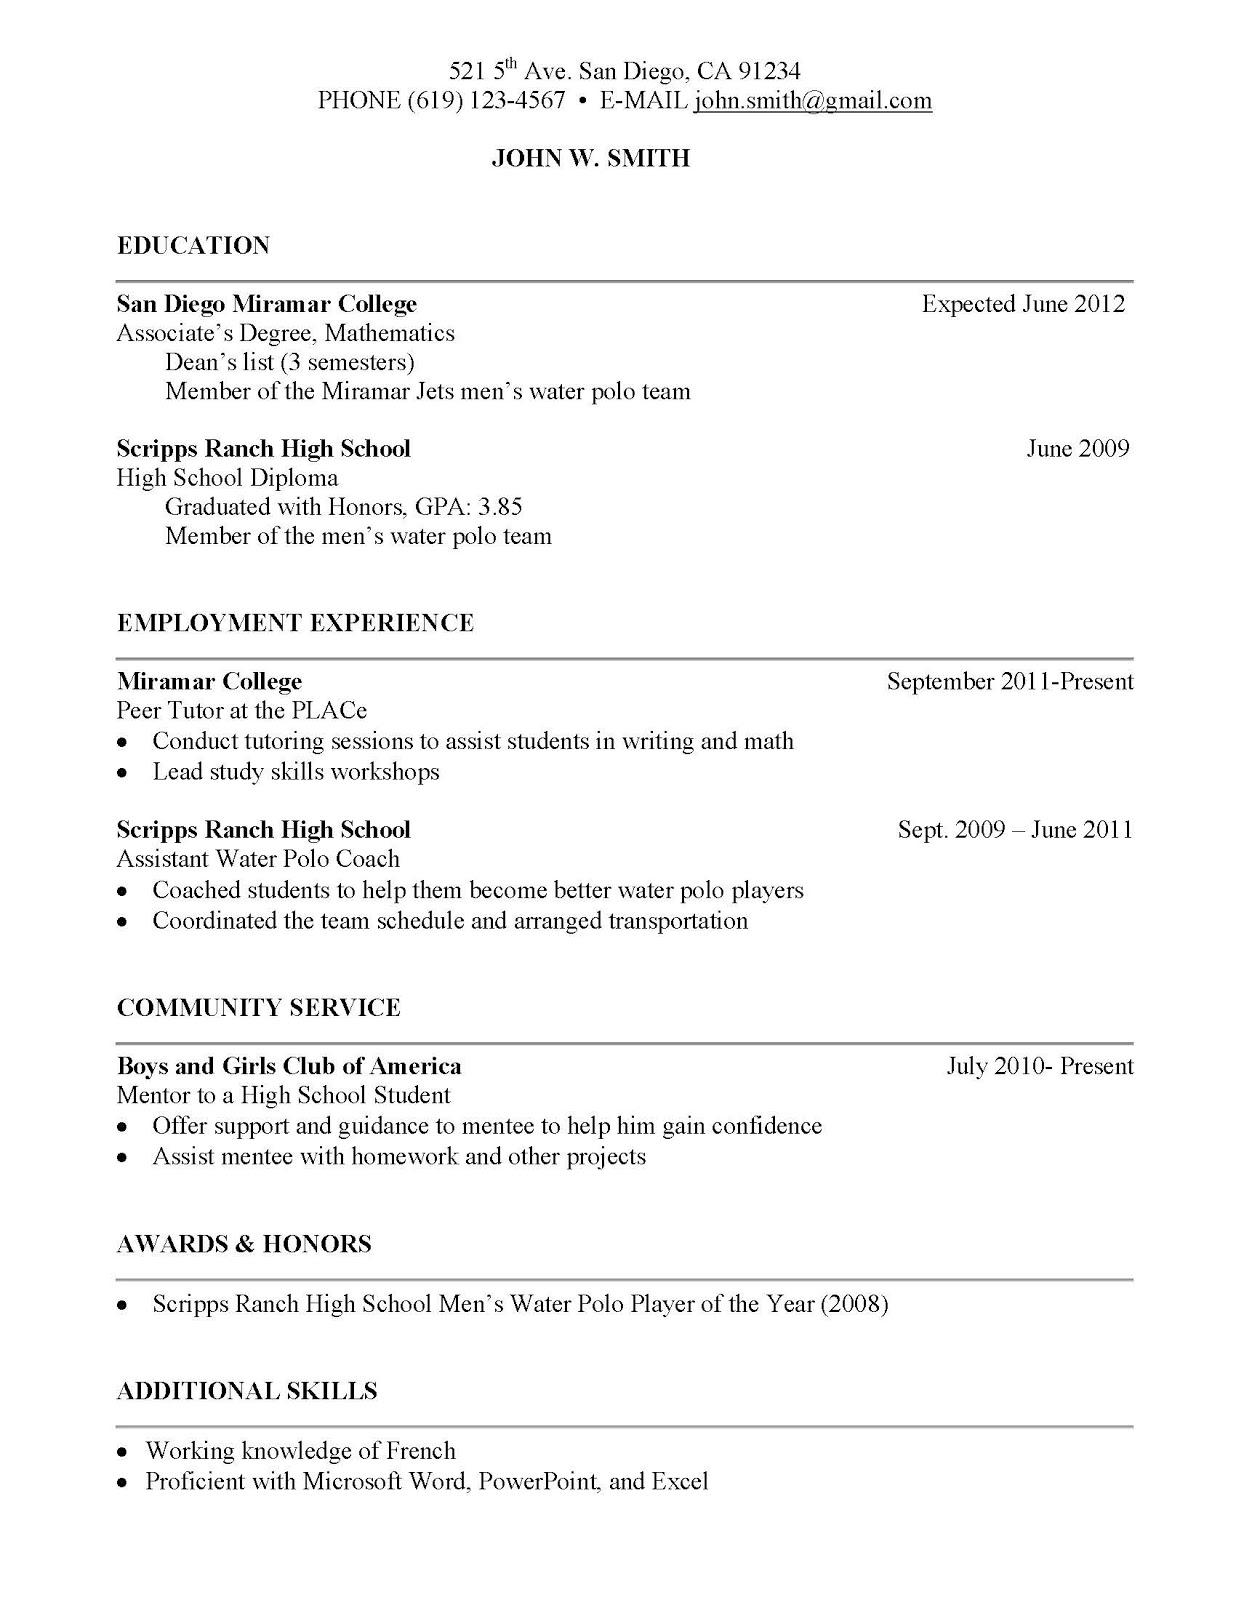 Build and release resume format